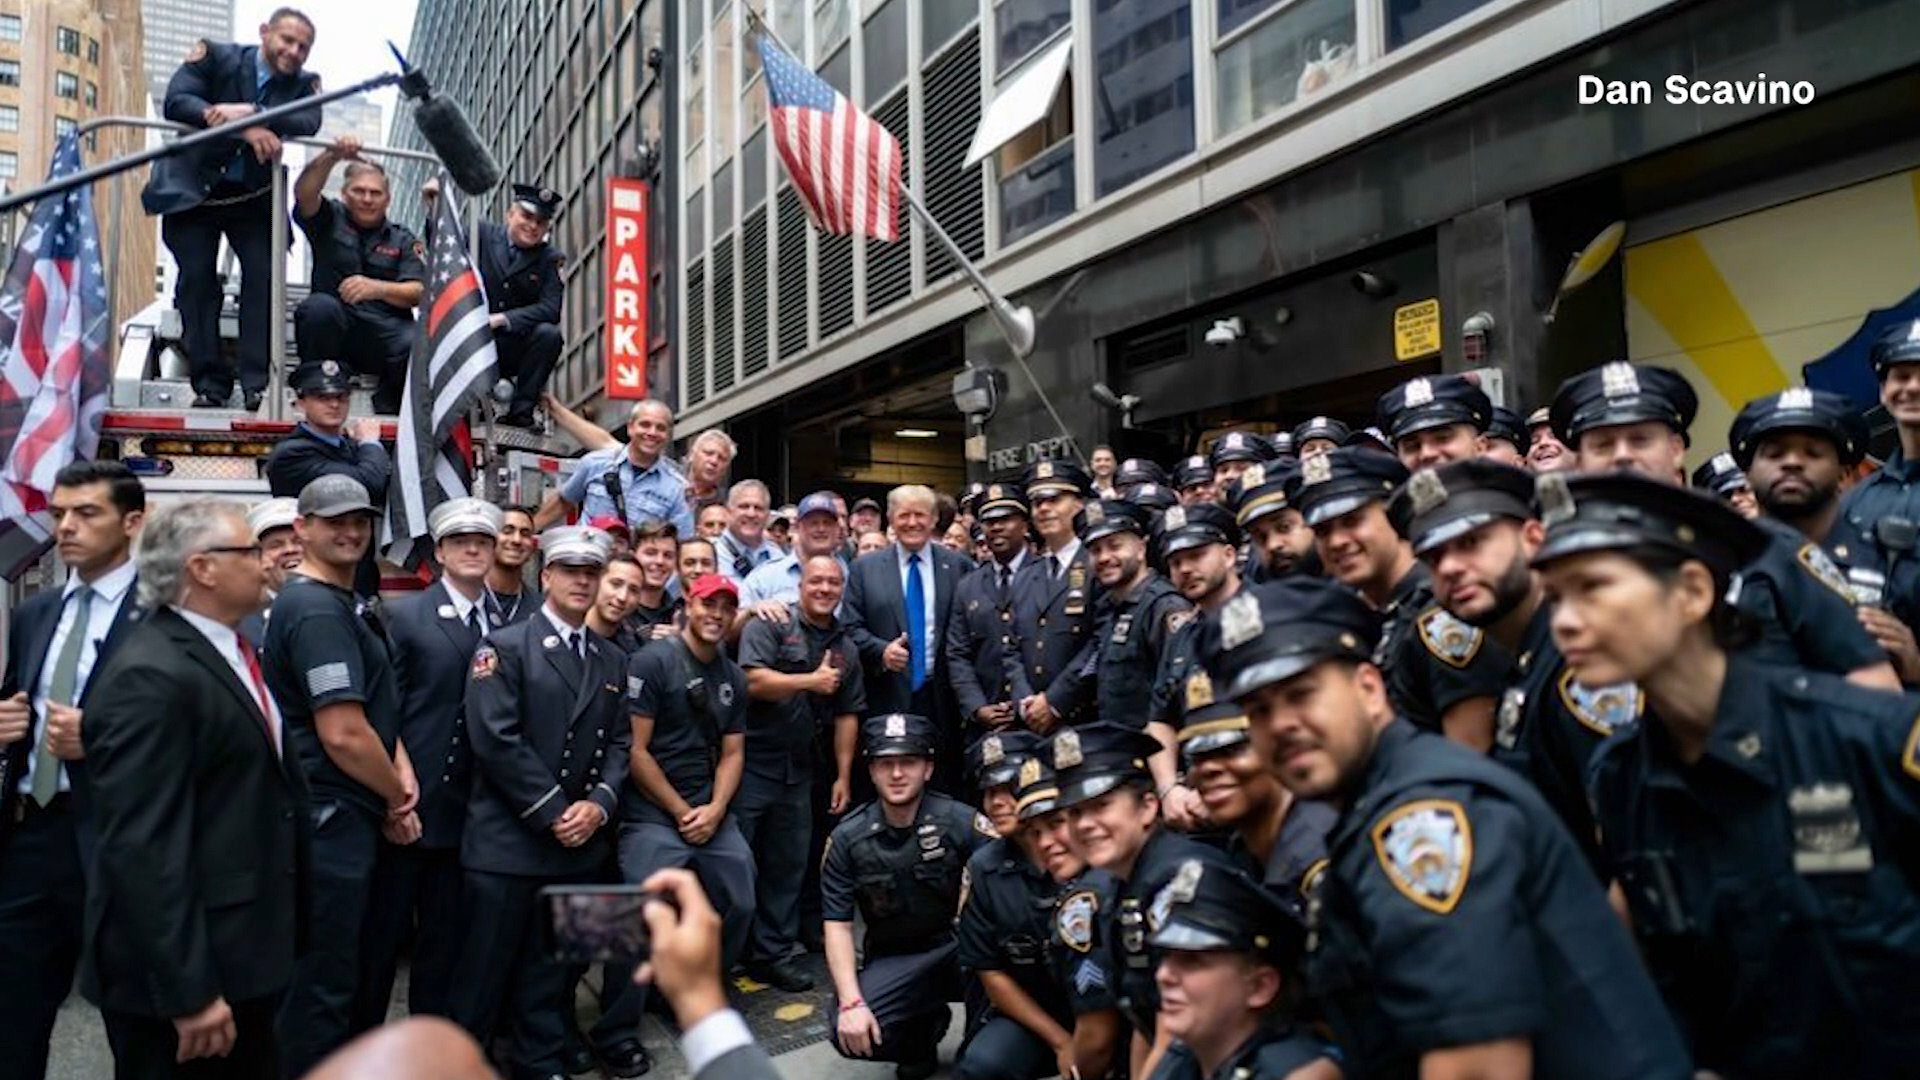 Trump visits NYPD precinct to support first responders on 9/11